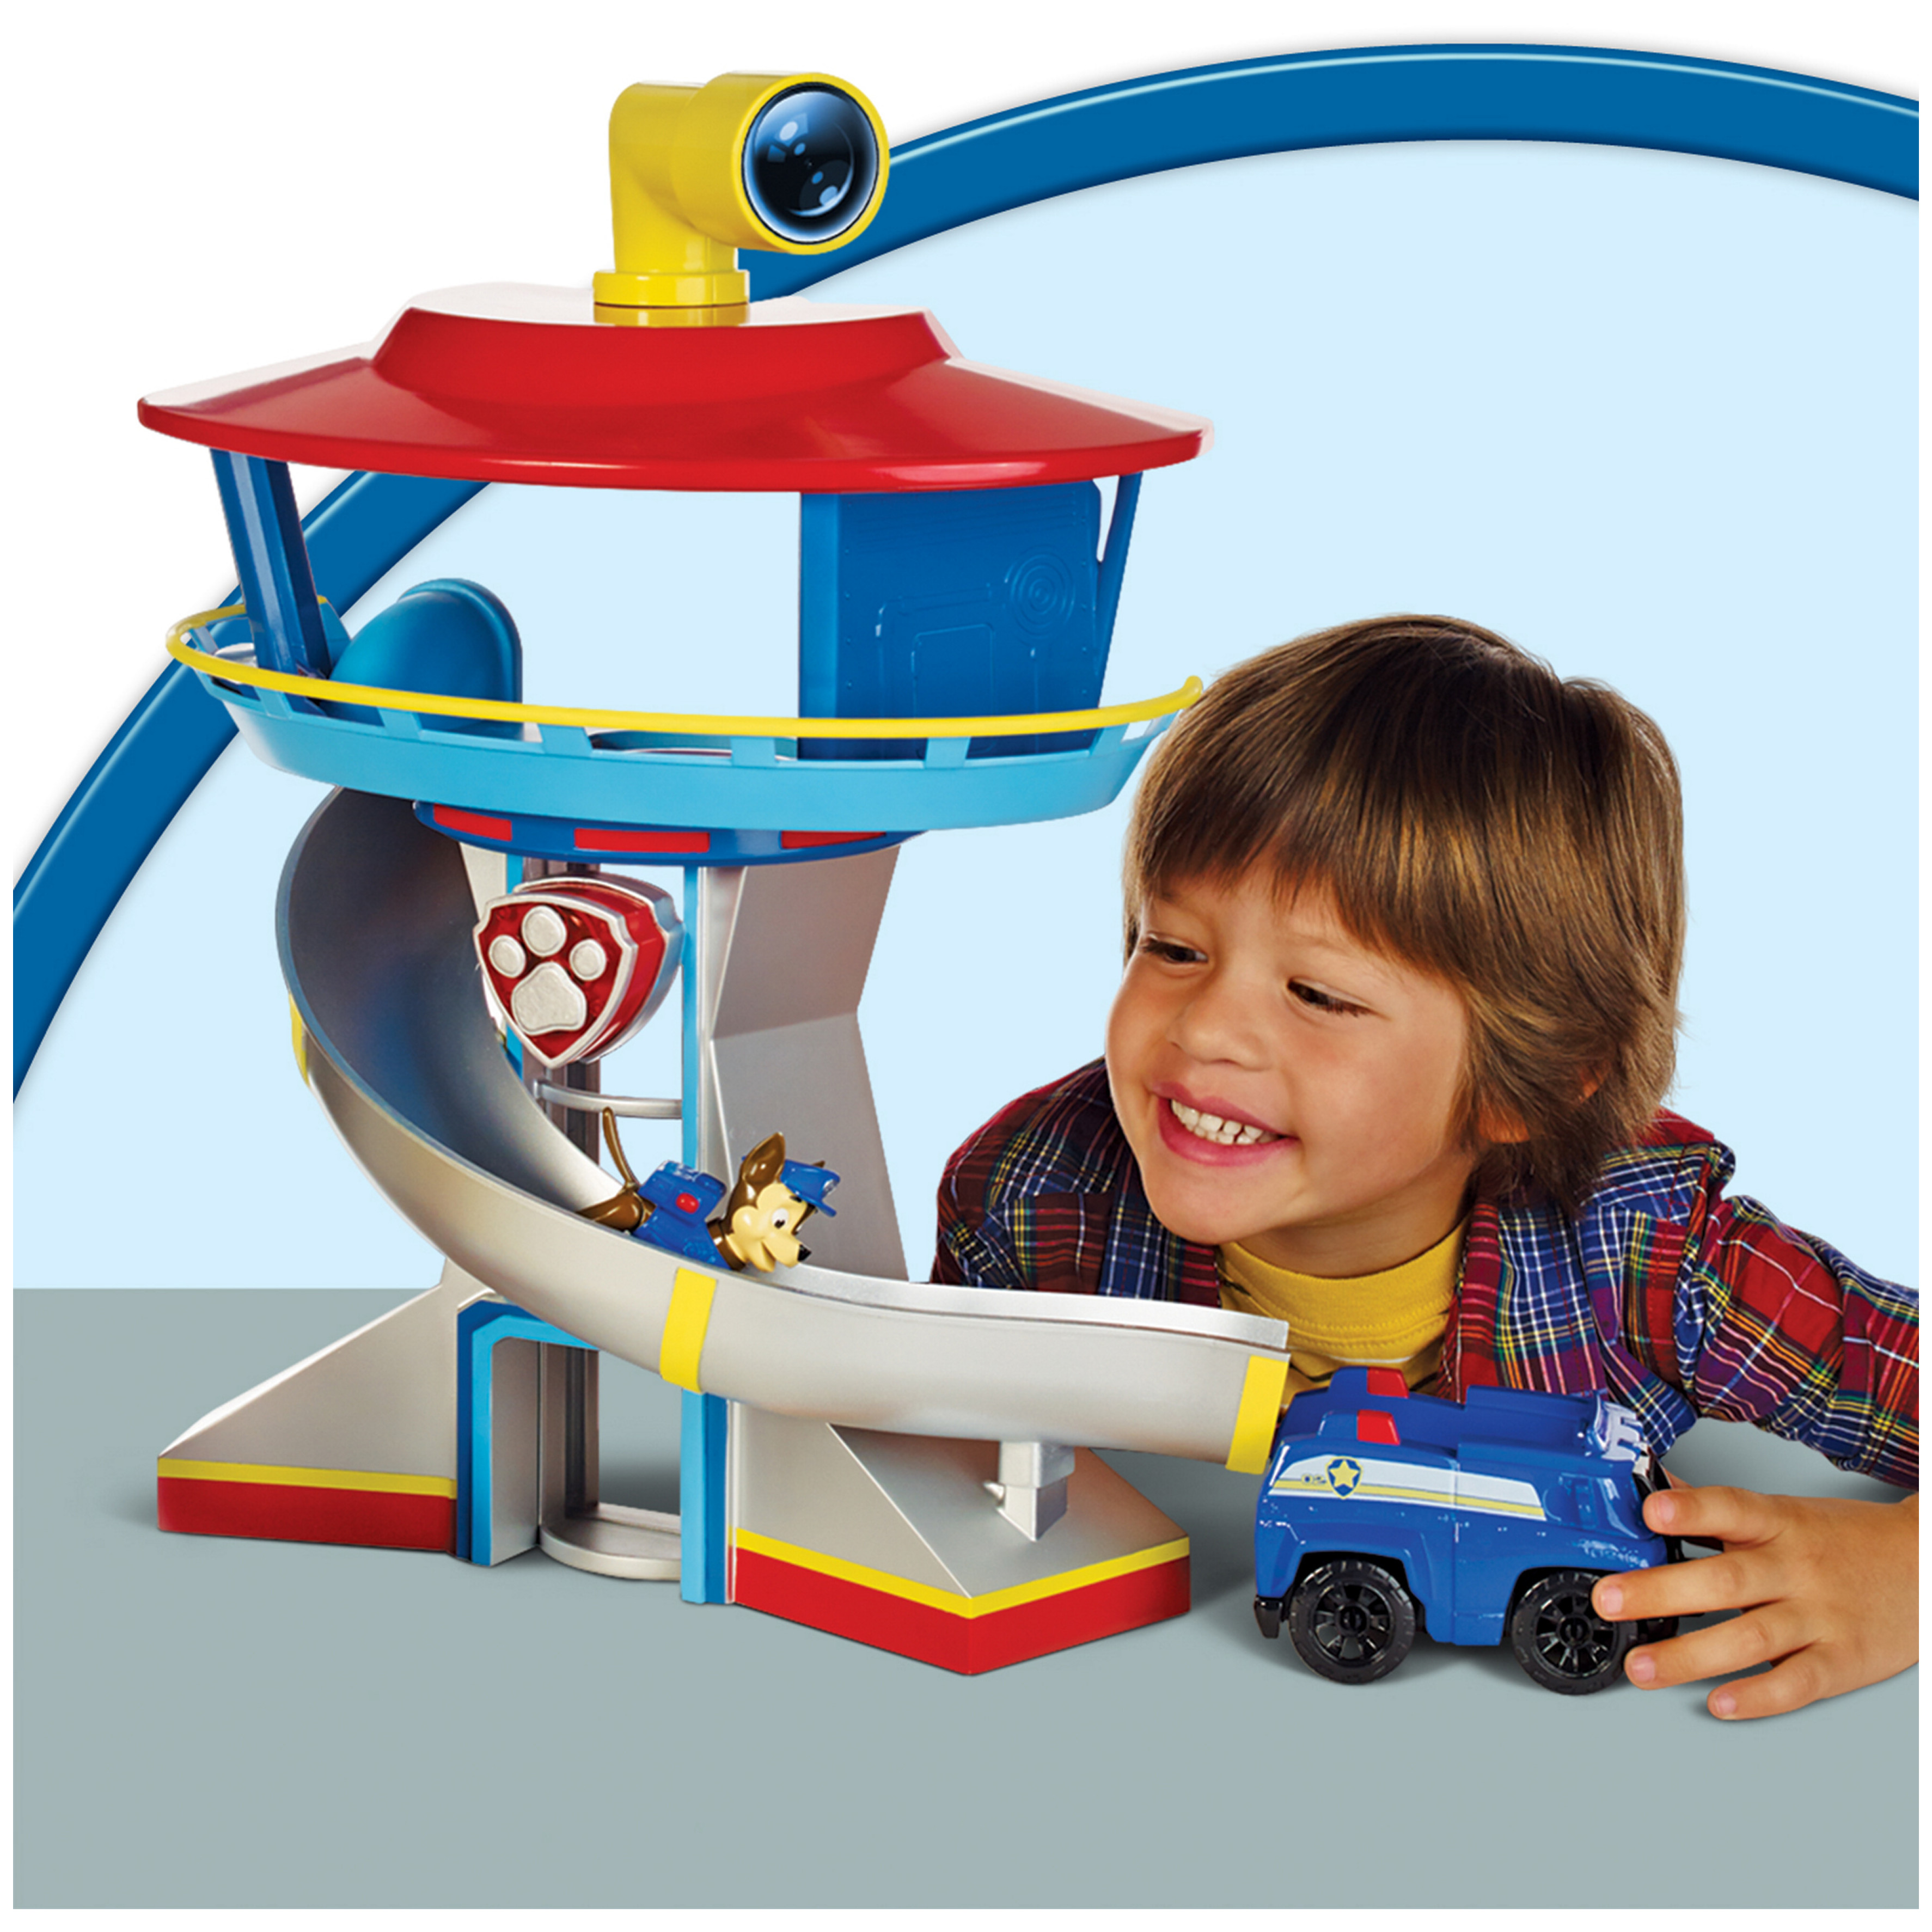 Paw Patrol Look-out Playset, Vehicle and Figure - image 4 of 6